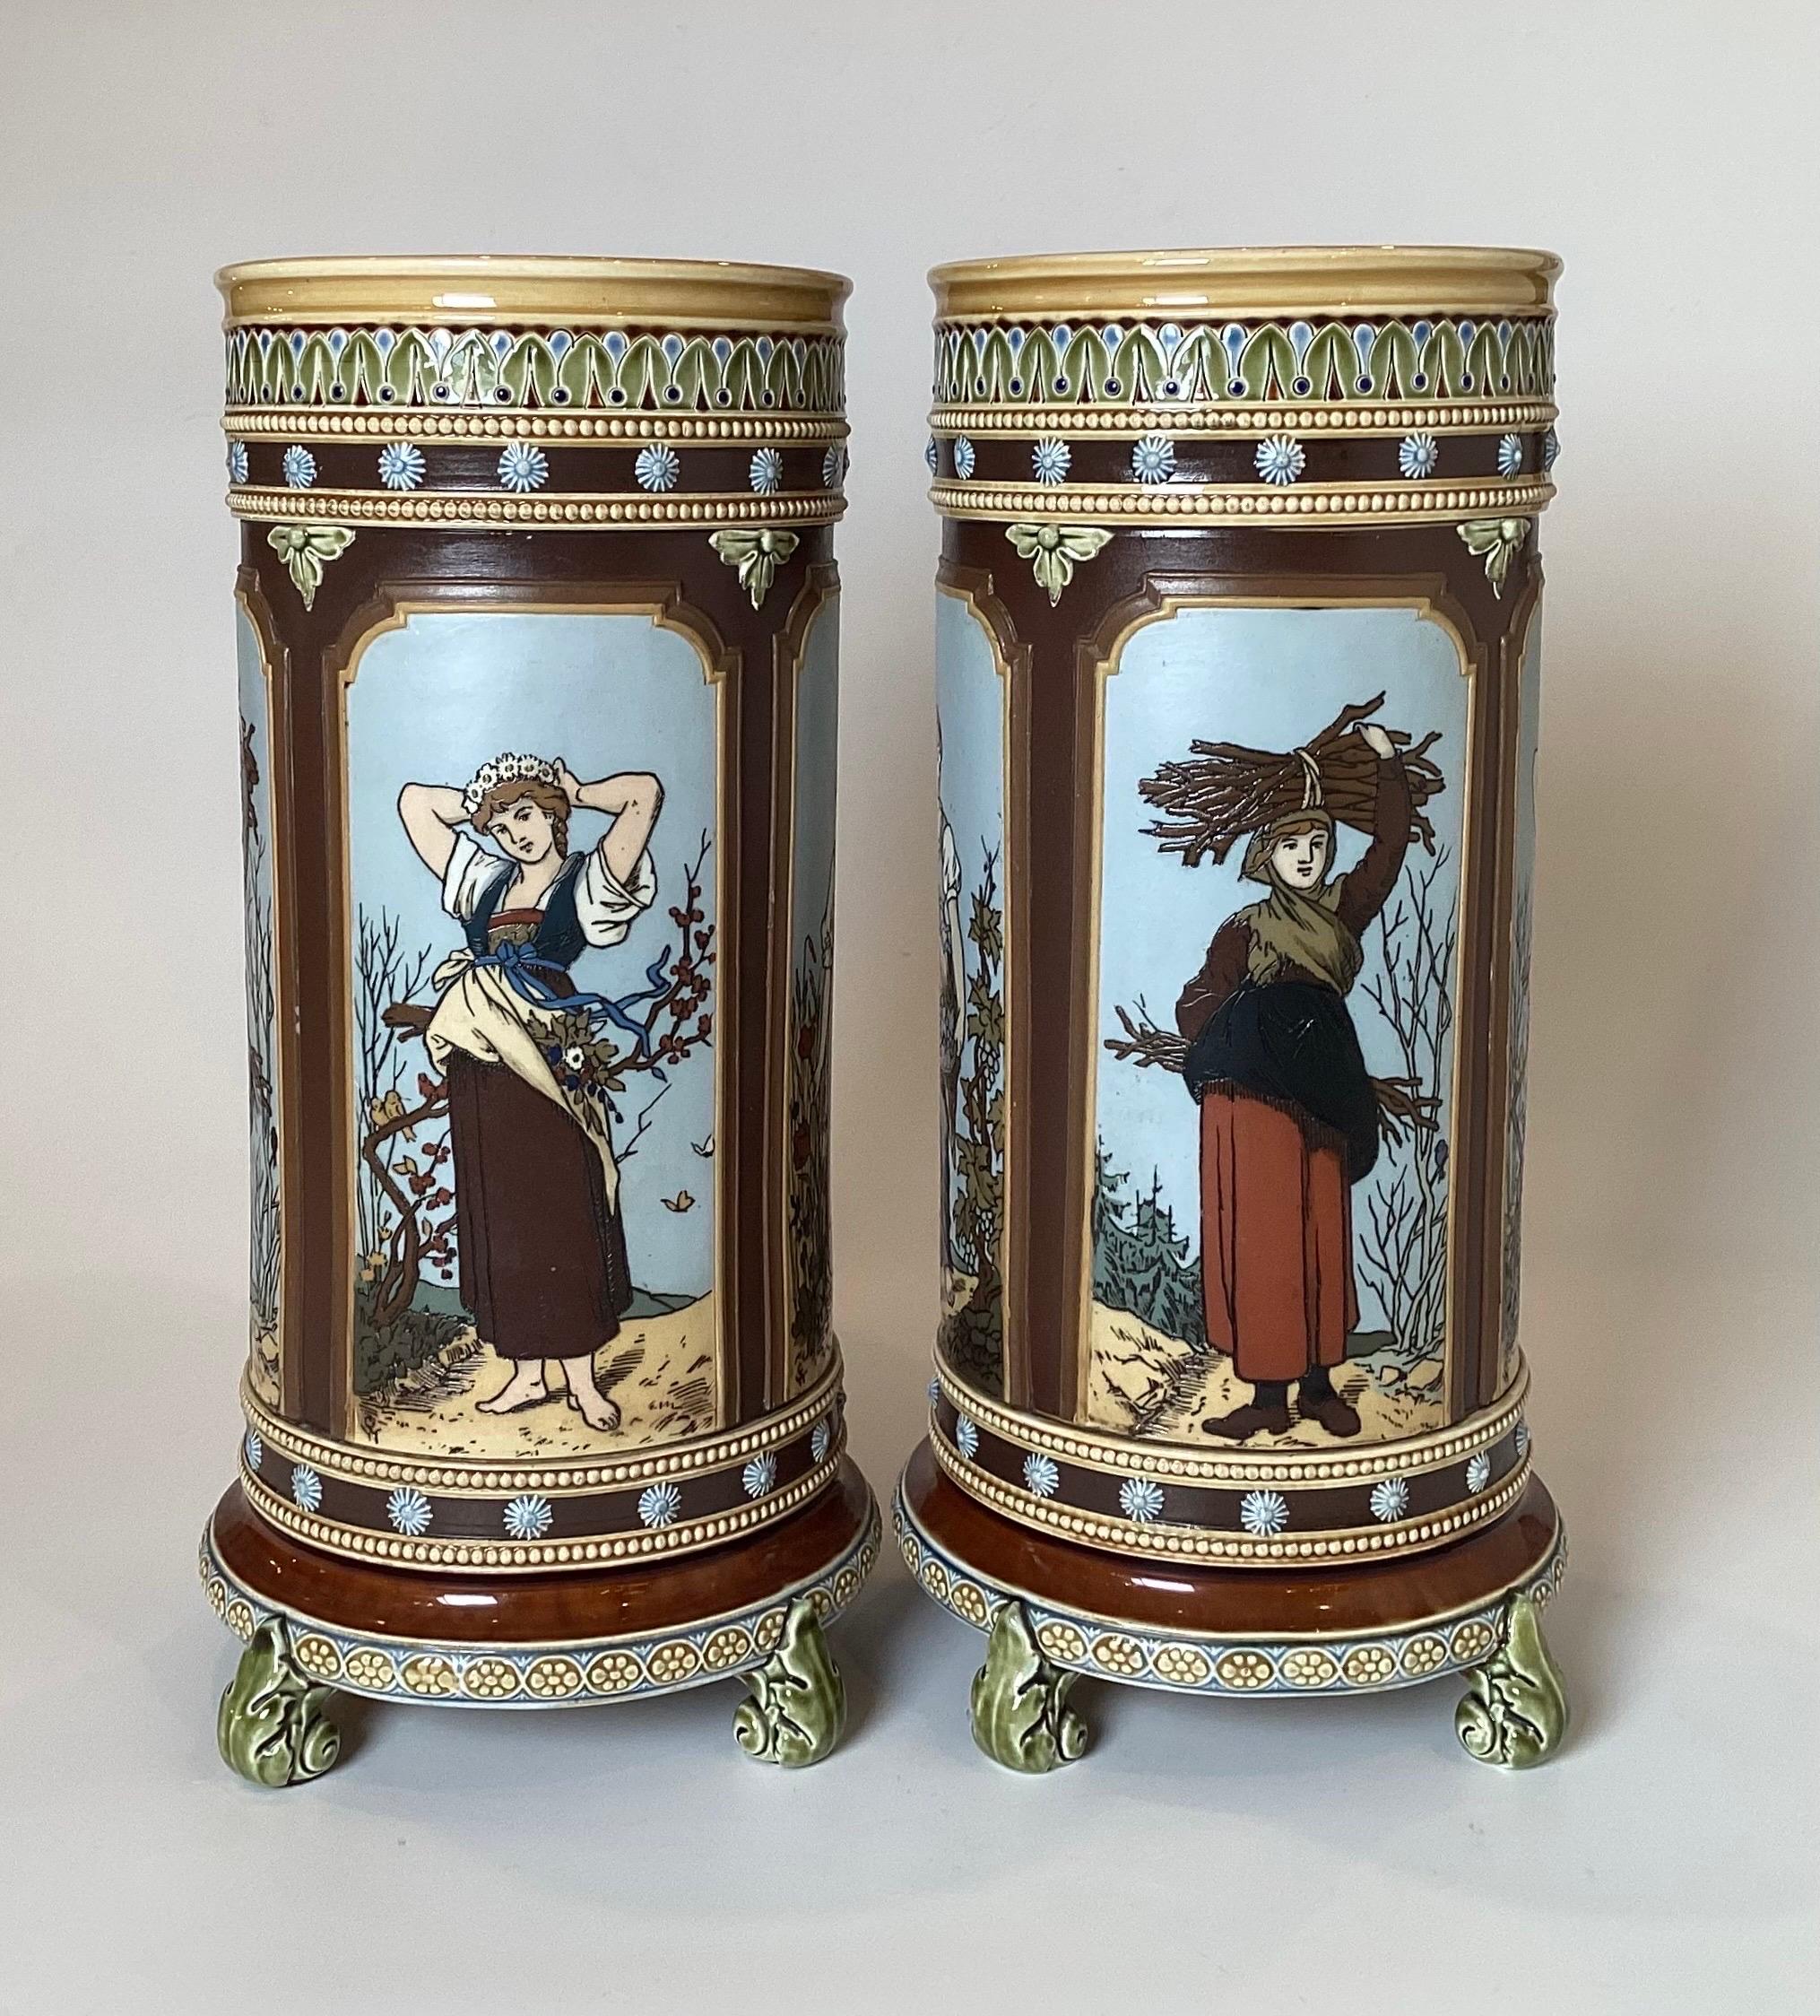 A pair of hand painted Mettlach footed cylinder vases, one depicting a maiden collecting tinder, the other a maiden gathering grapes for wine making. In overall very good condition. The colorful vases made in Germany, 1880s.